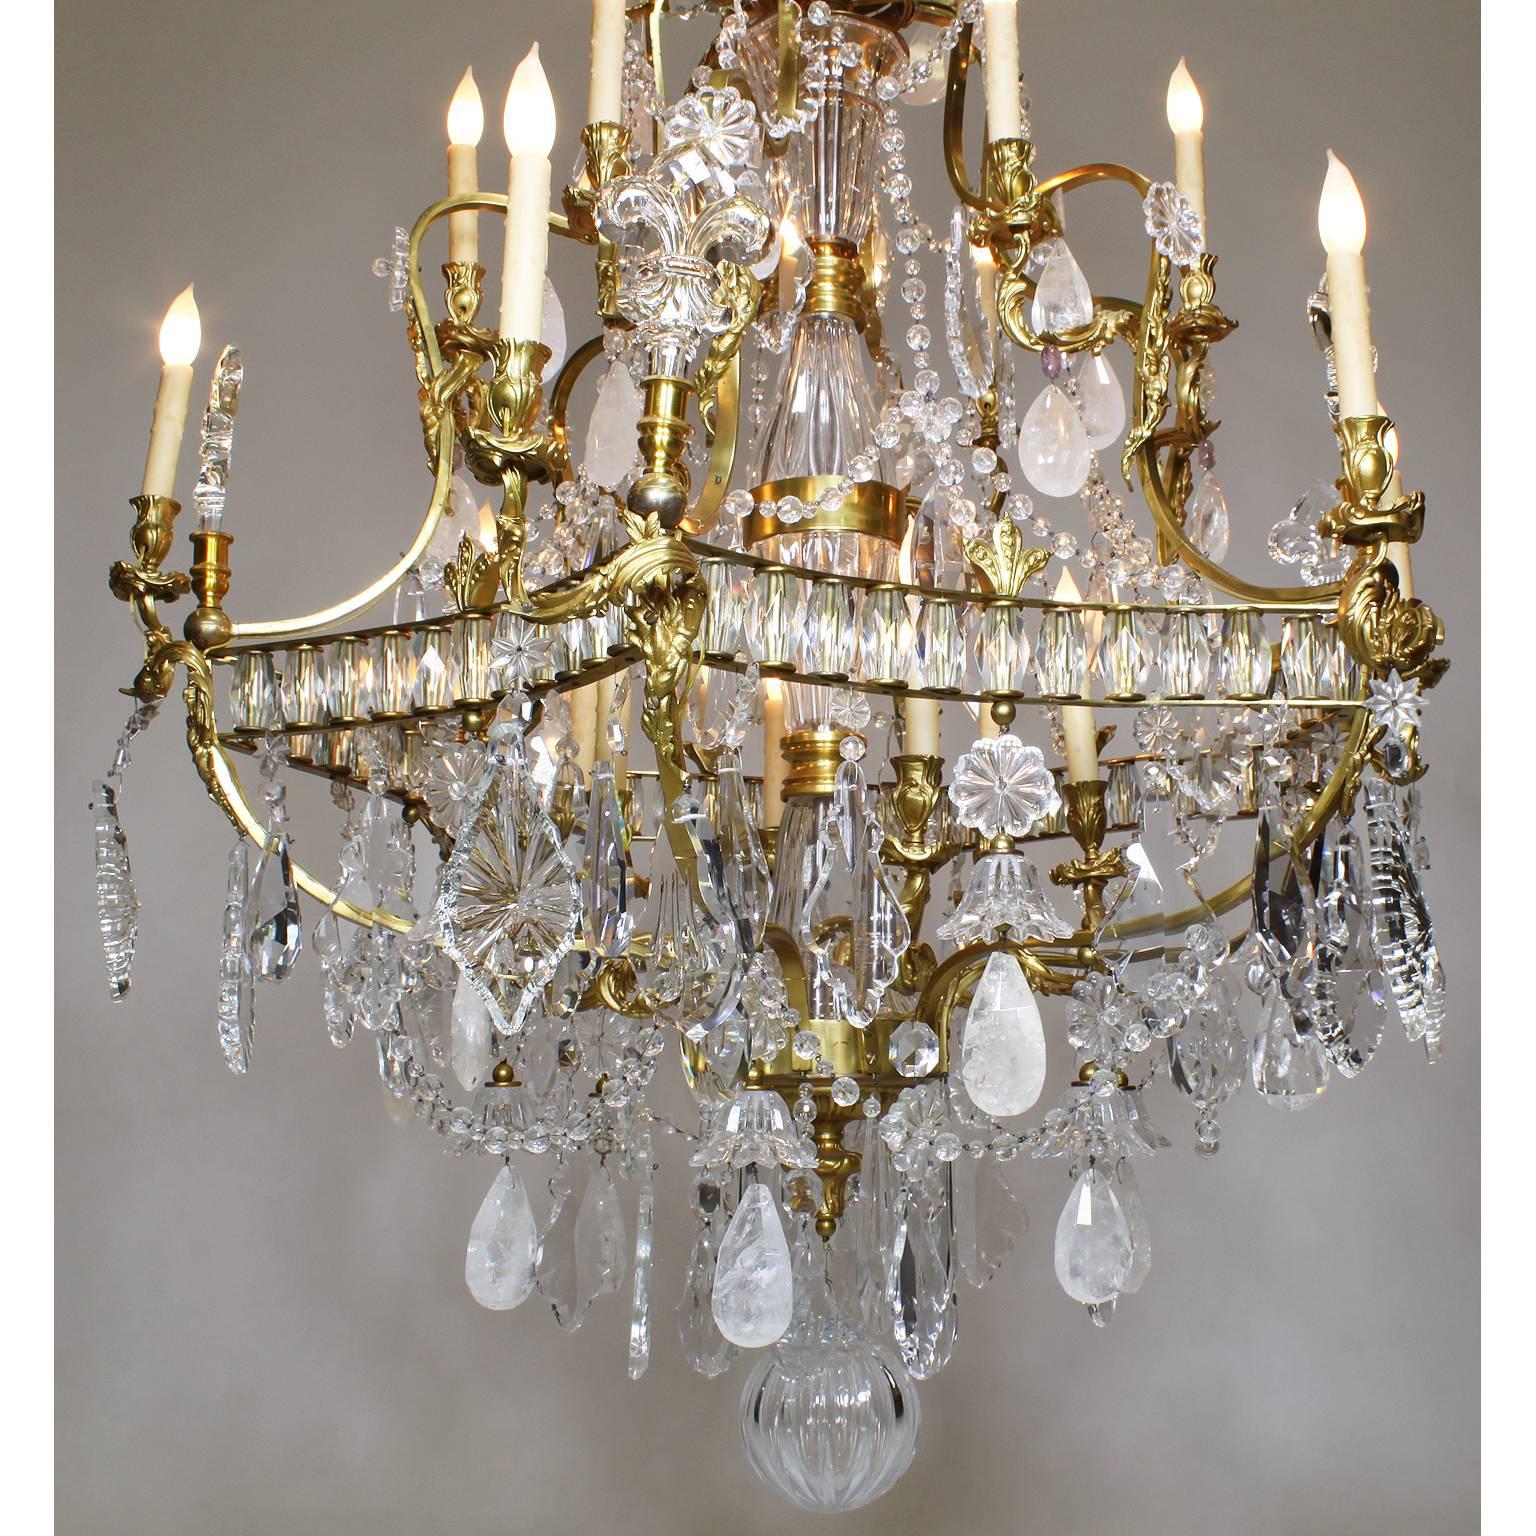 Molded Fine French Louis XV Style Gilt-Bronze and Rock Crystal Chandelier, 20th Century For Sale